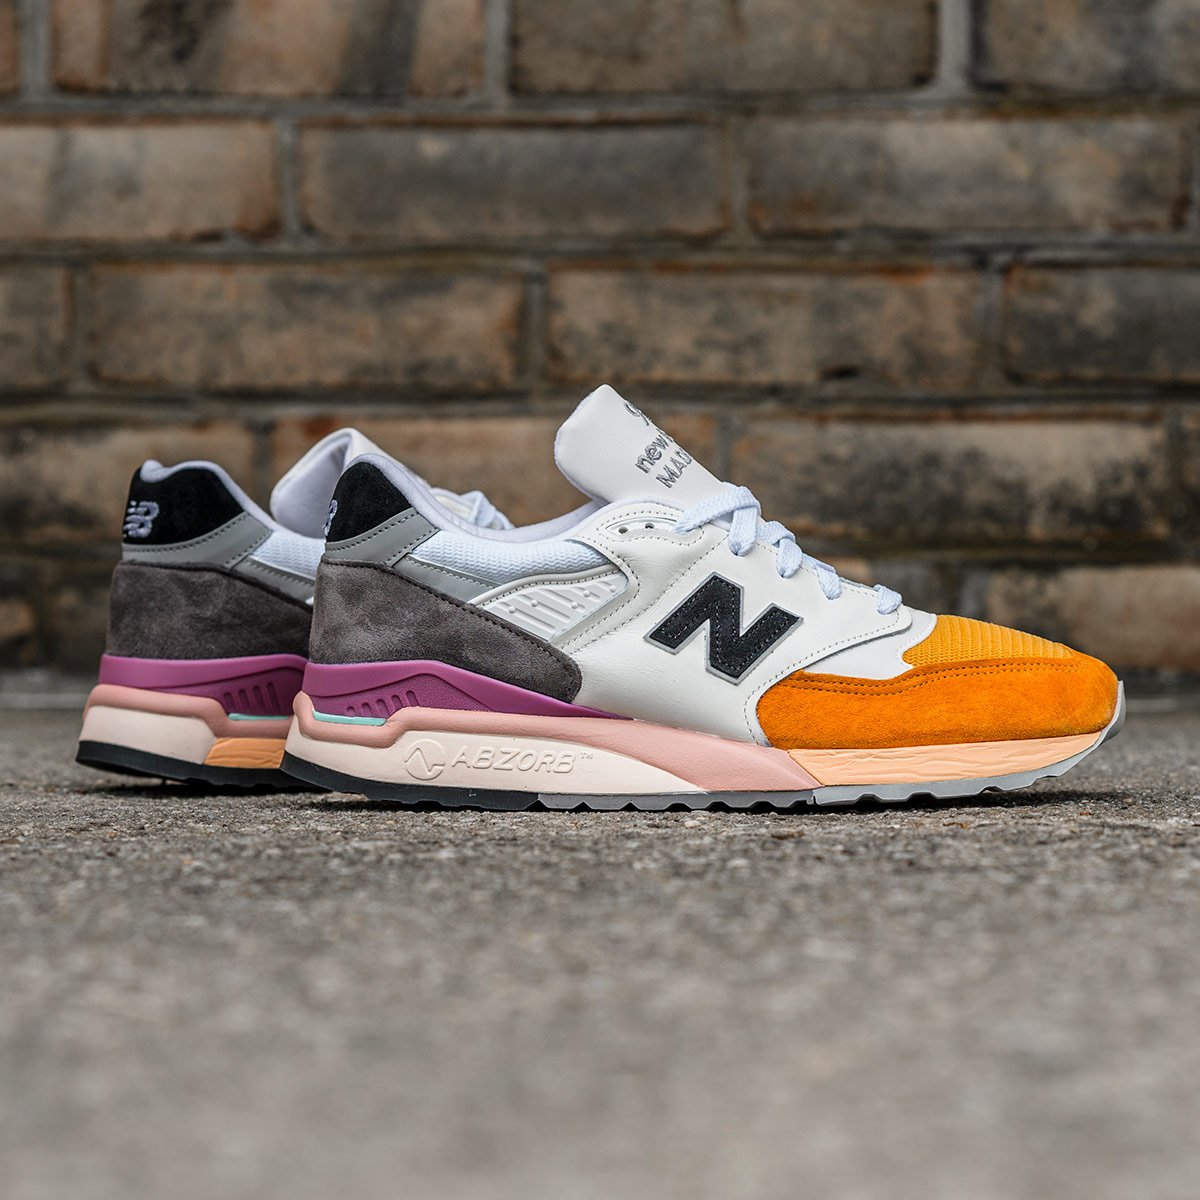 dañar Desafortunadamente aparato YCMC by Shoe City on Twitter: "The men's New Balance 998 "Coastal" just  arrived in select stores and online here: https://t.co/U0R6nhvfyH  https://t.co/sJ6eeV6YXS" / Twitter